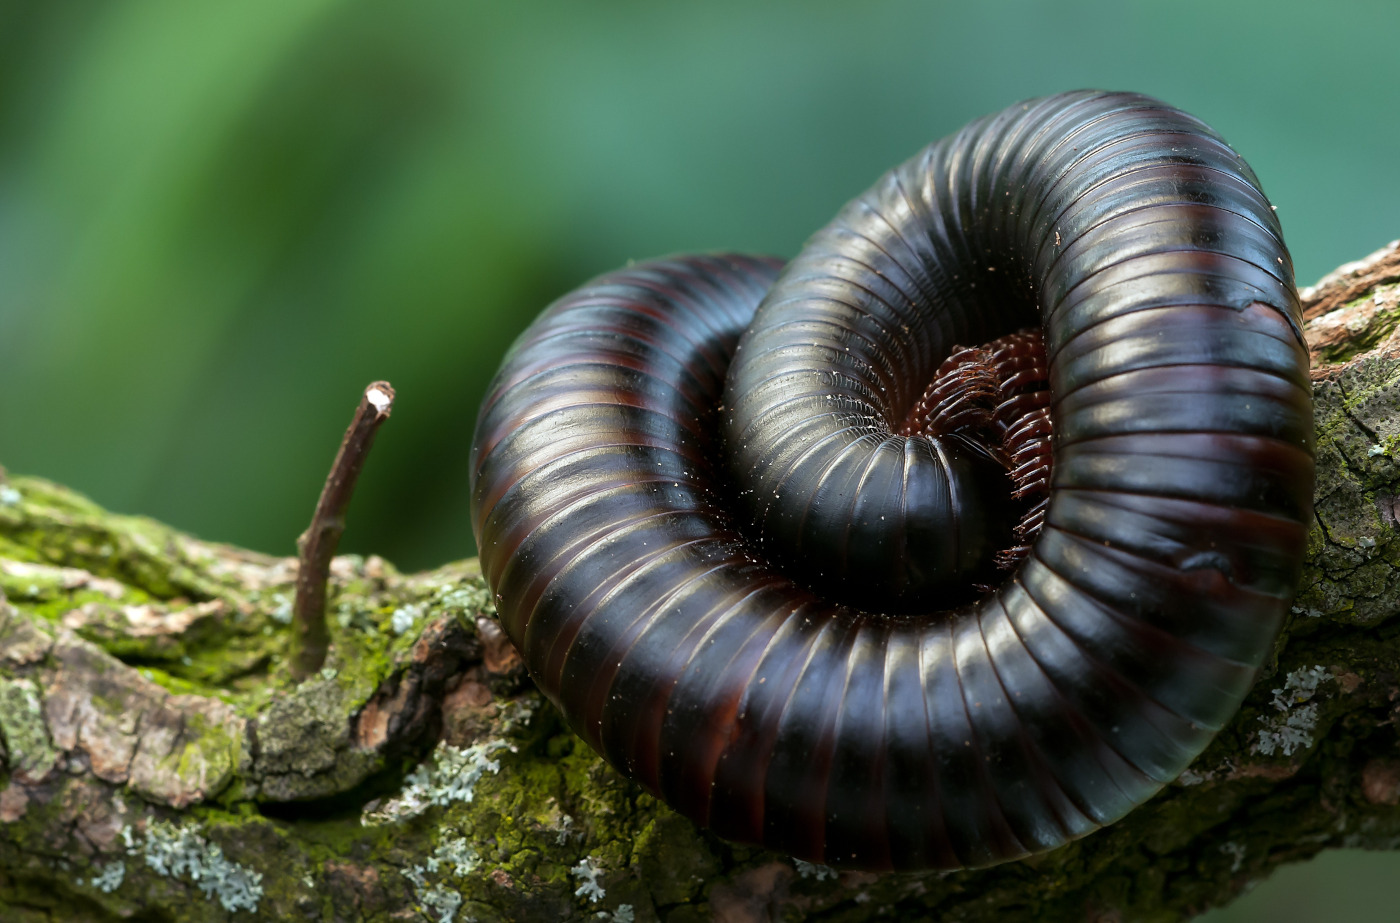 Giant African Millipede curled up on tree branch